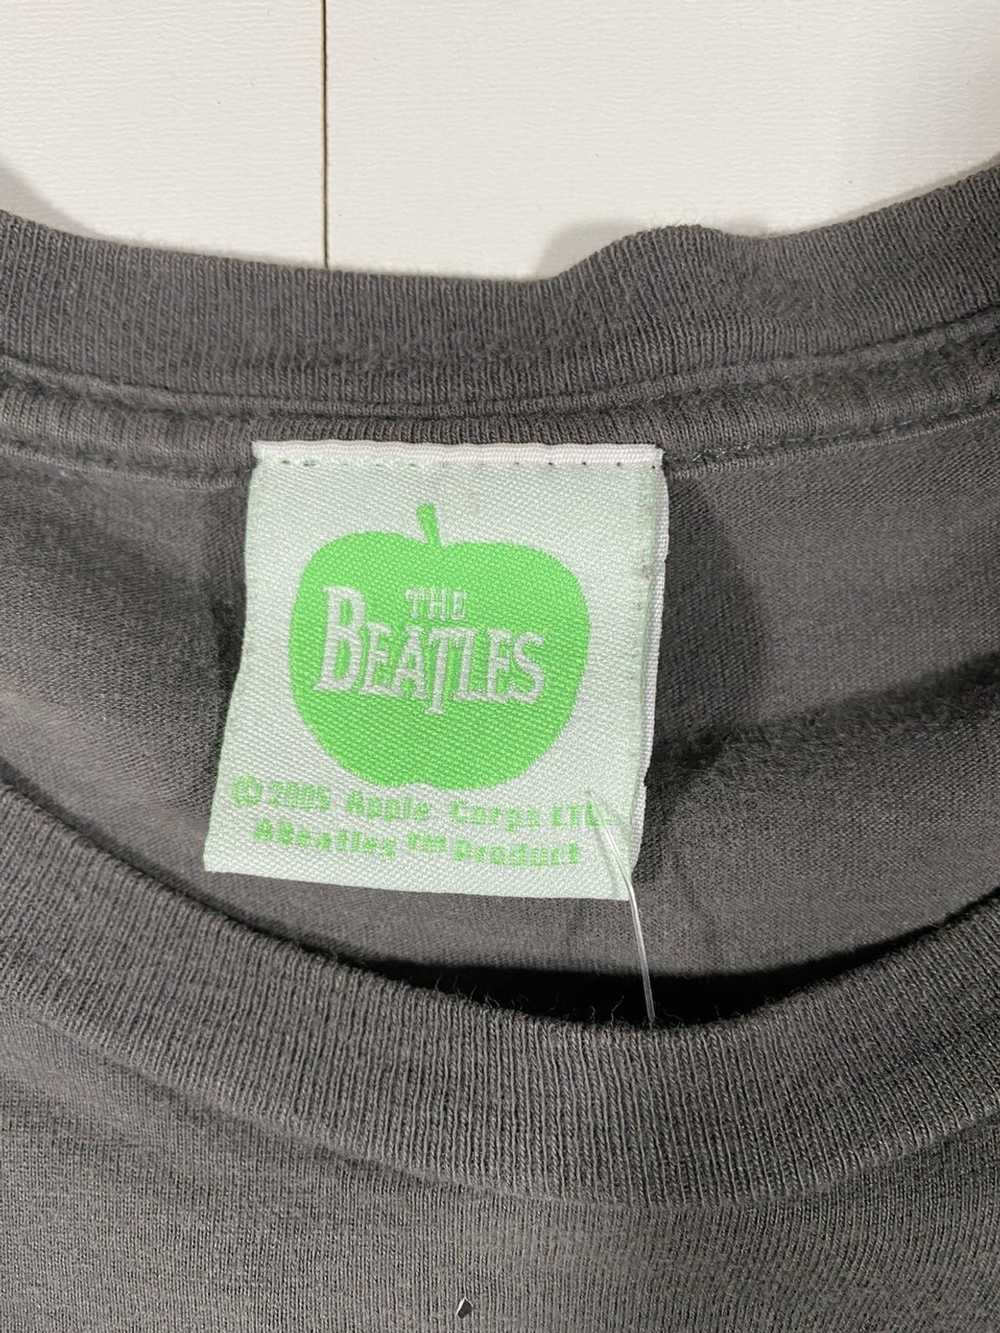 Apple × Band Tees The Beatles ‘05 ‘Let It Be’ Tee - image 3